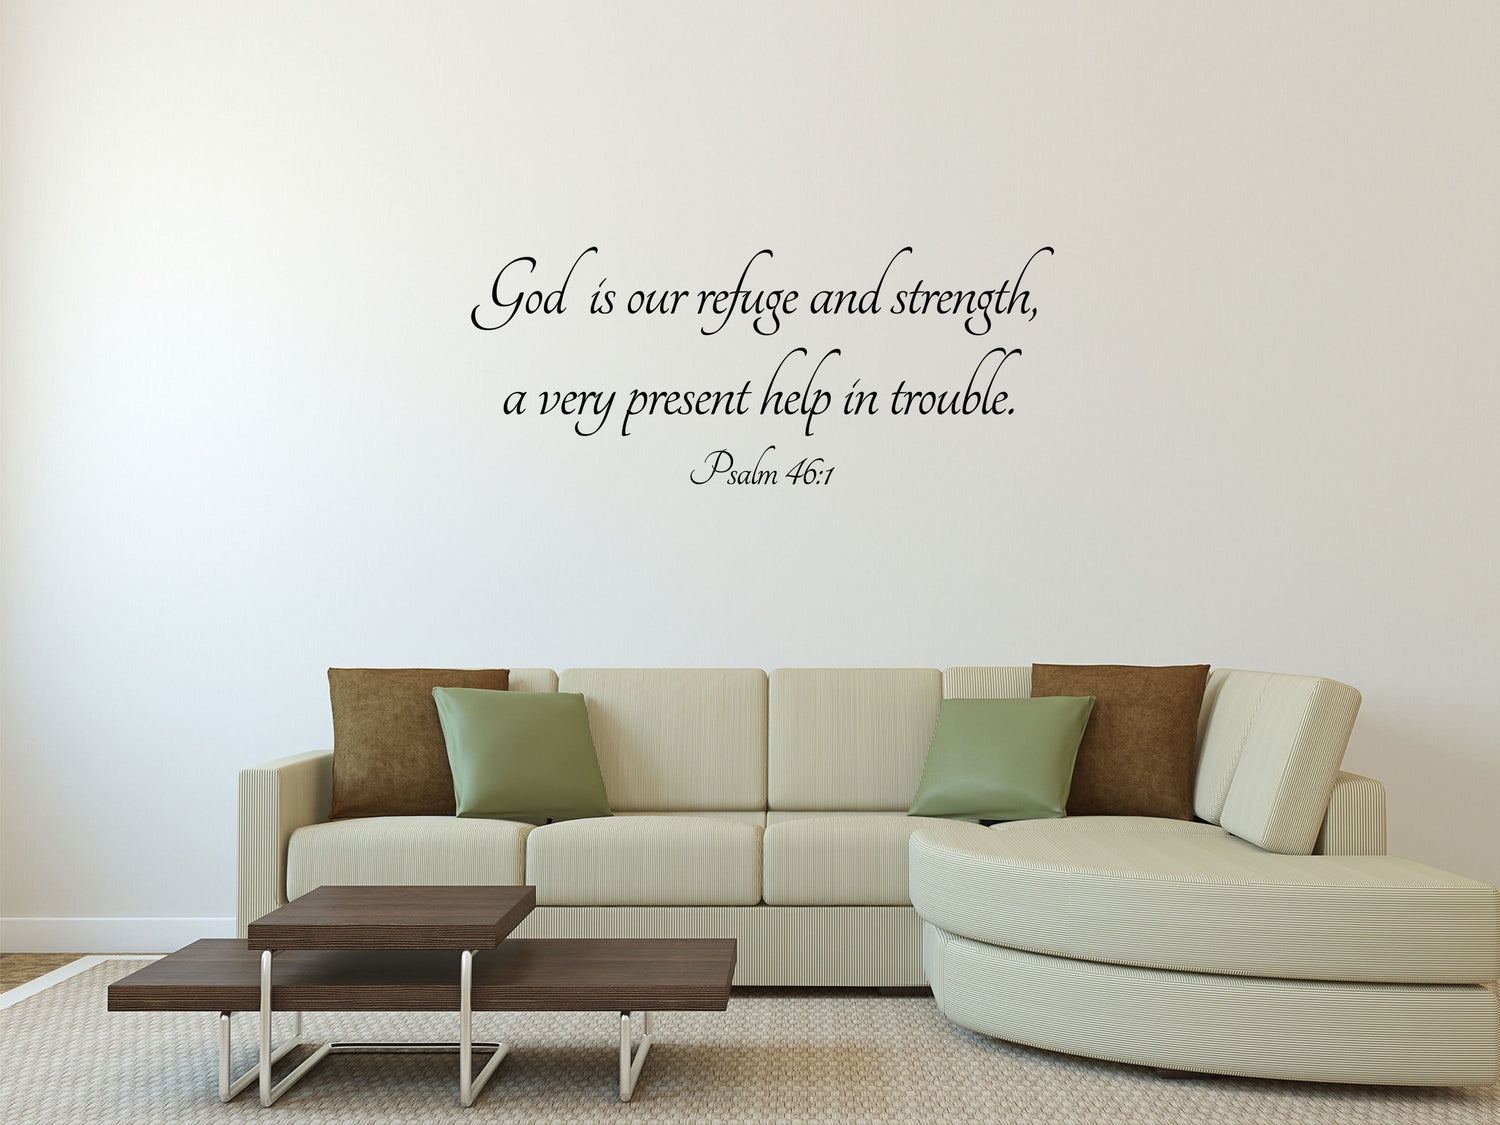 Psalm 46:1 - Scripture Wall Decals Vinyl Wall Decal Inspirational Wall Signs 